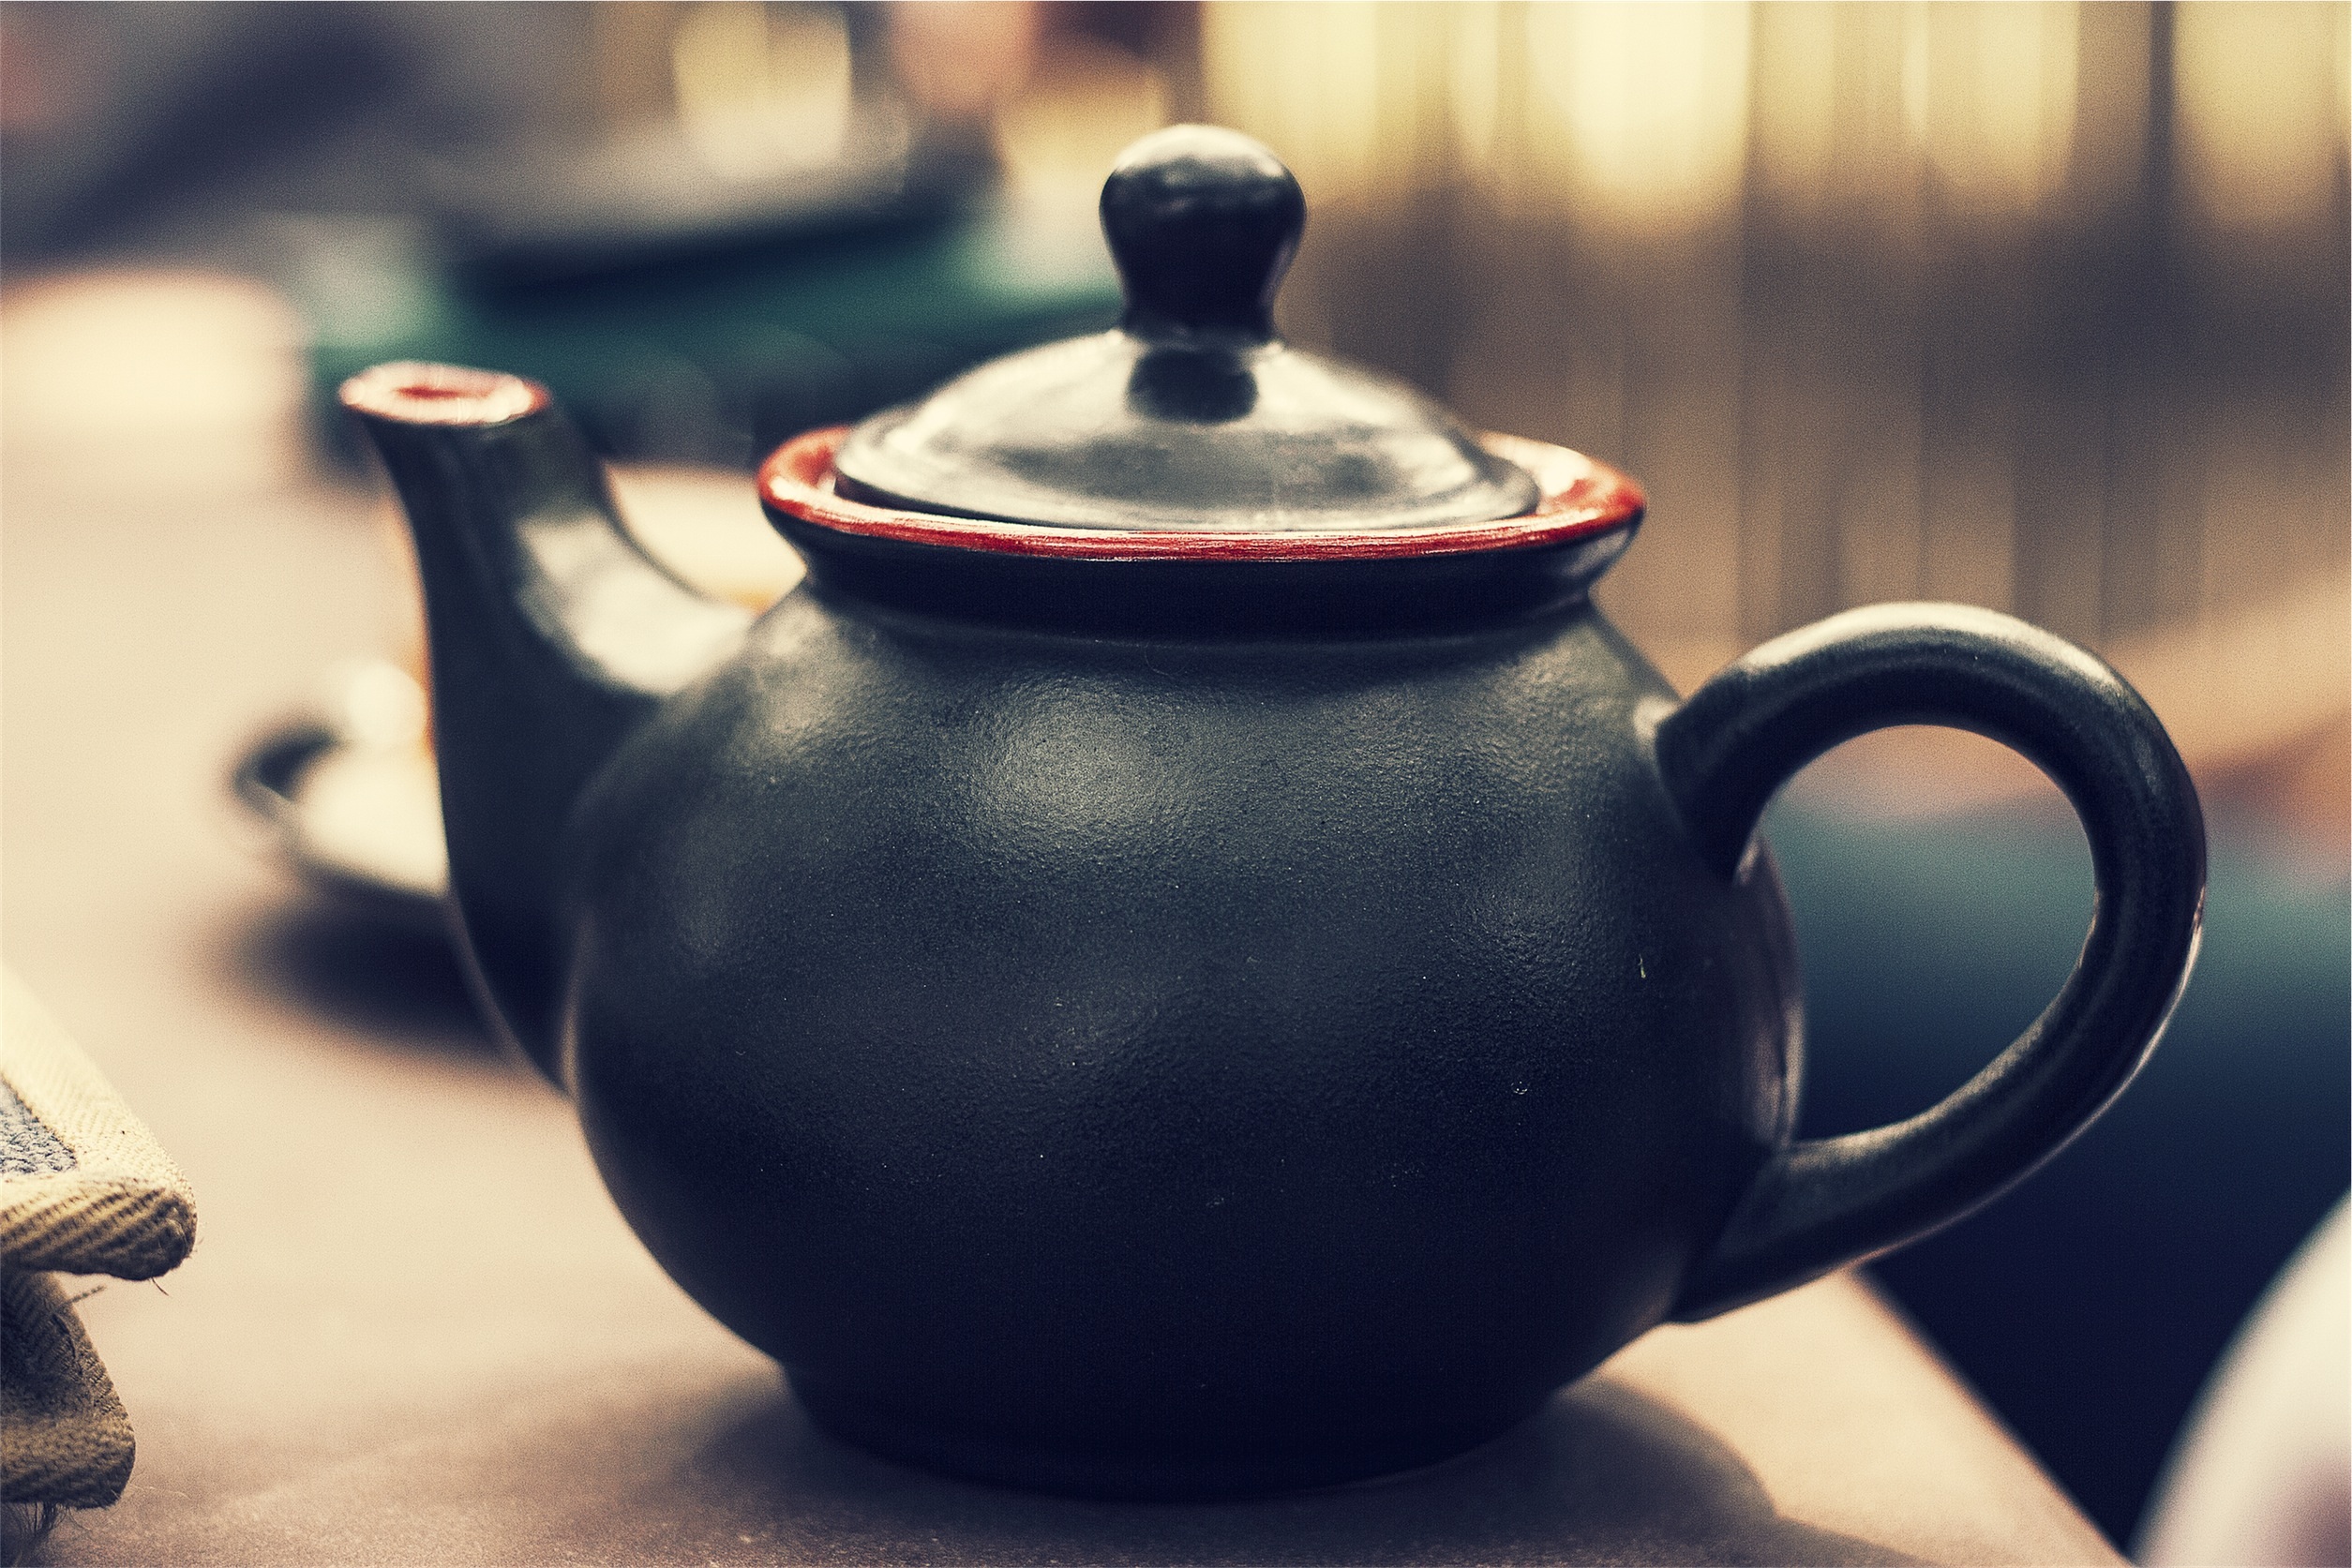 80713 Screensavers and Wallpapers Teapot for phone. Download tablewares, miscellanea, miscellaneous, teapot, kettle, porcelain pictures for free